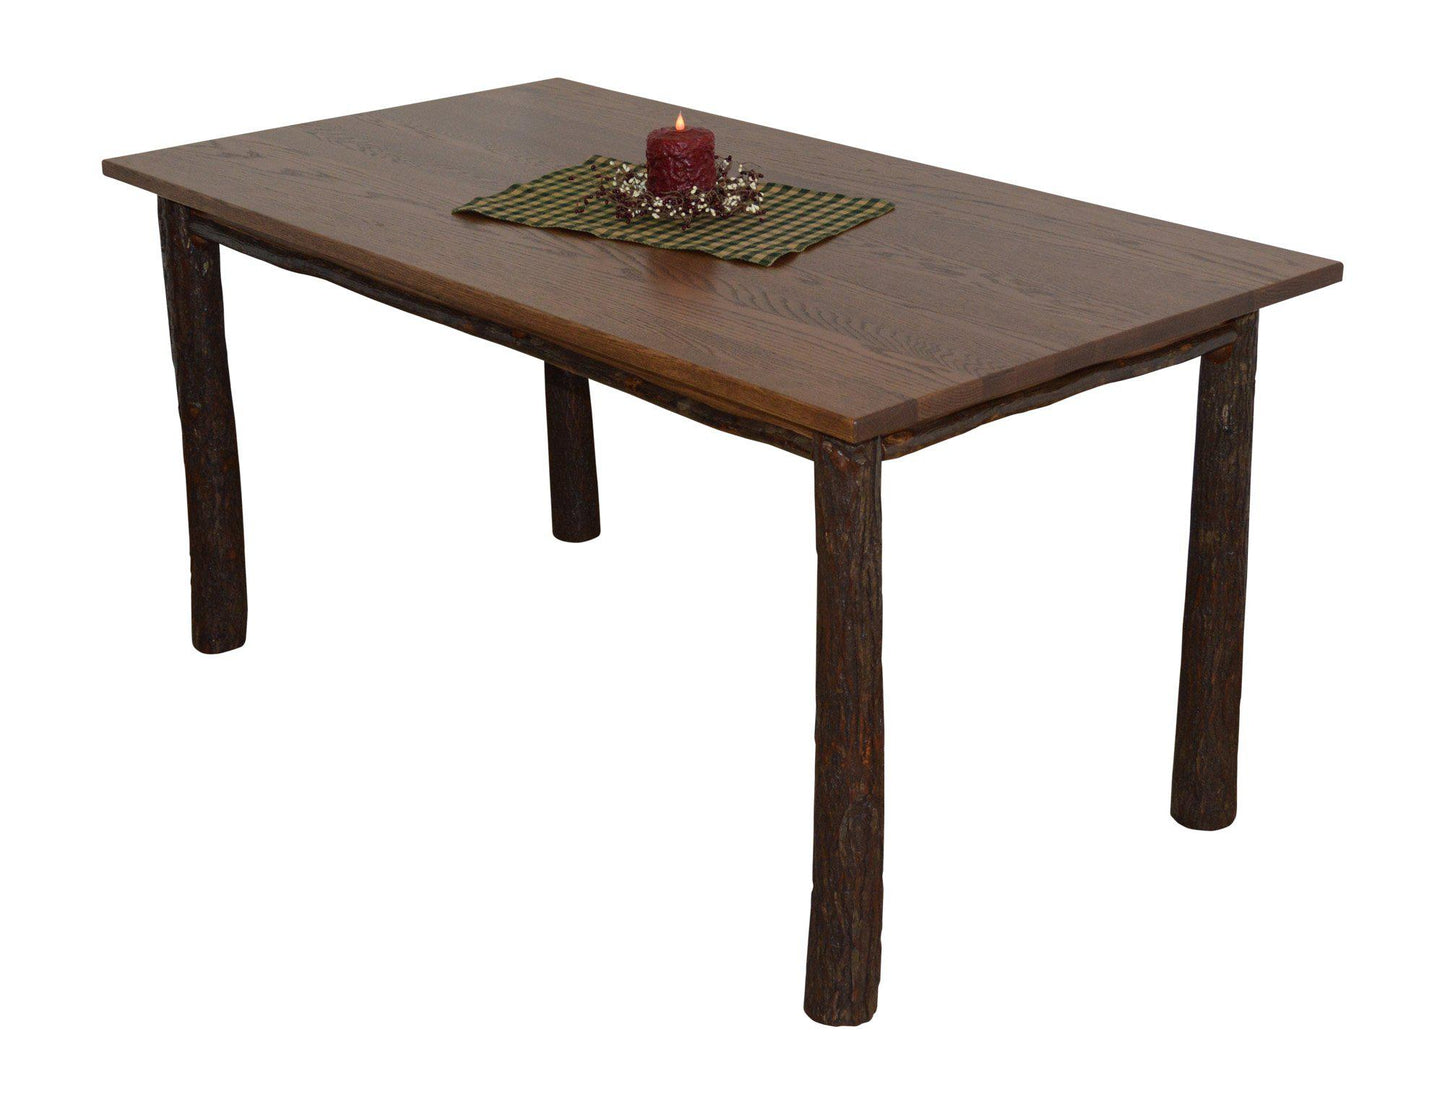 A&L Furniture Co. 5' Hickory Farm Table - LEAD TIME TO SHIP 4 WEEKS OR LESS